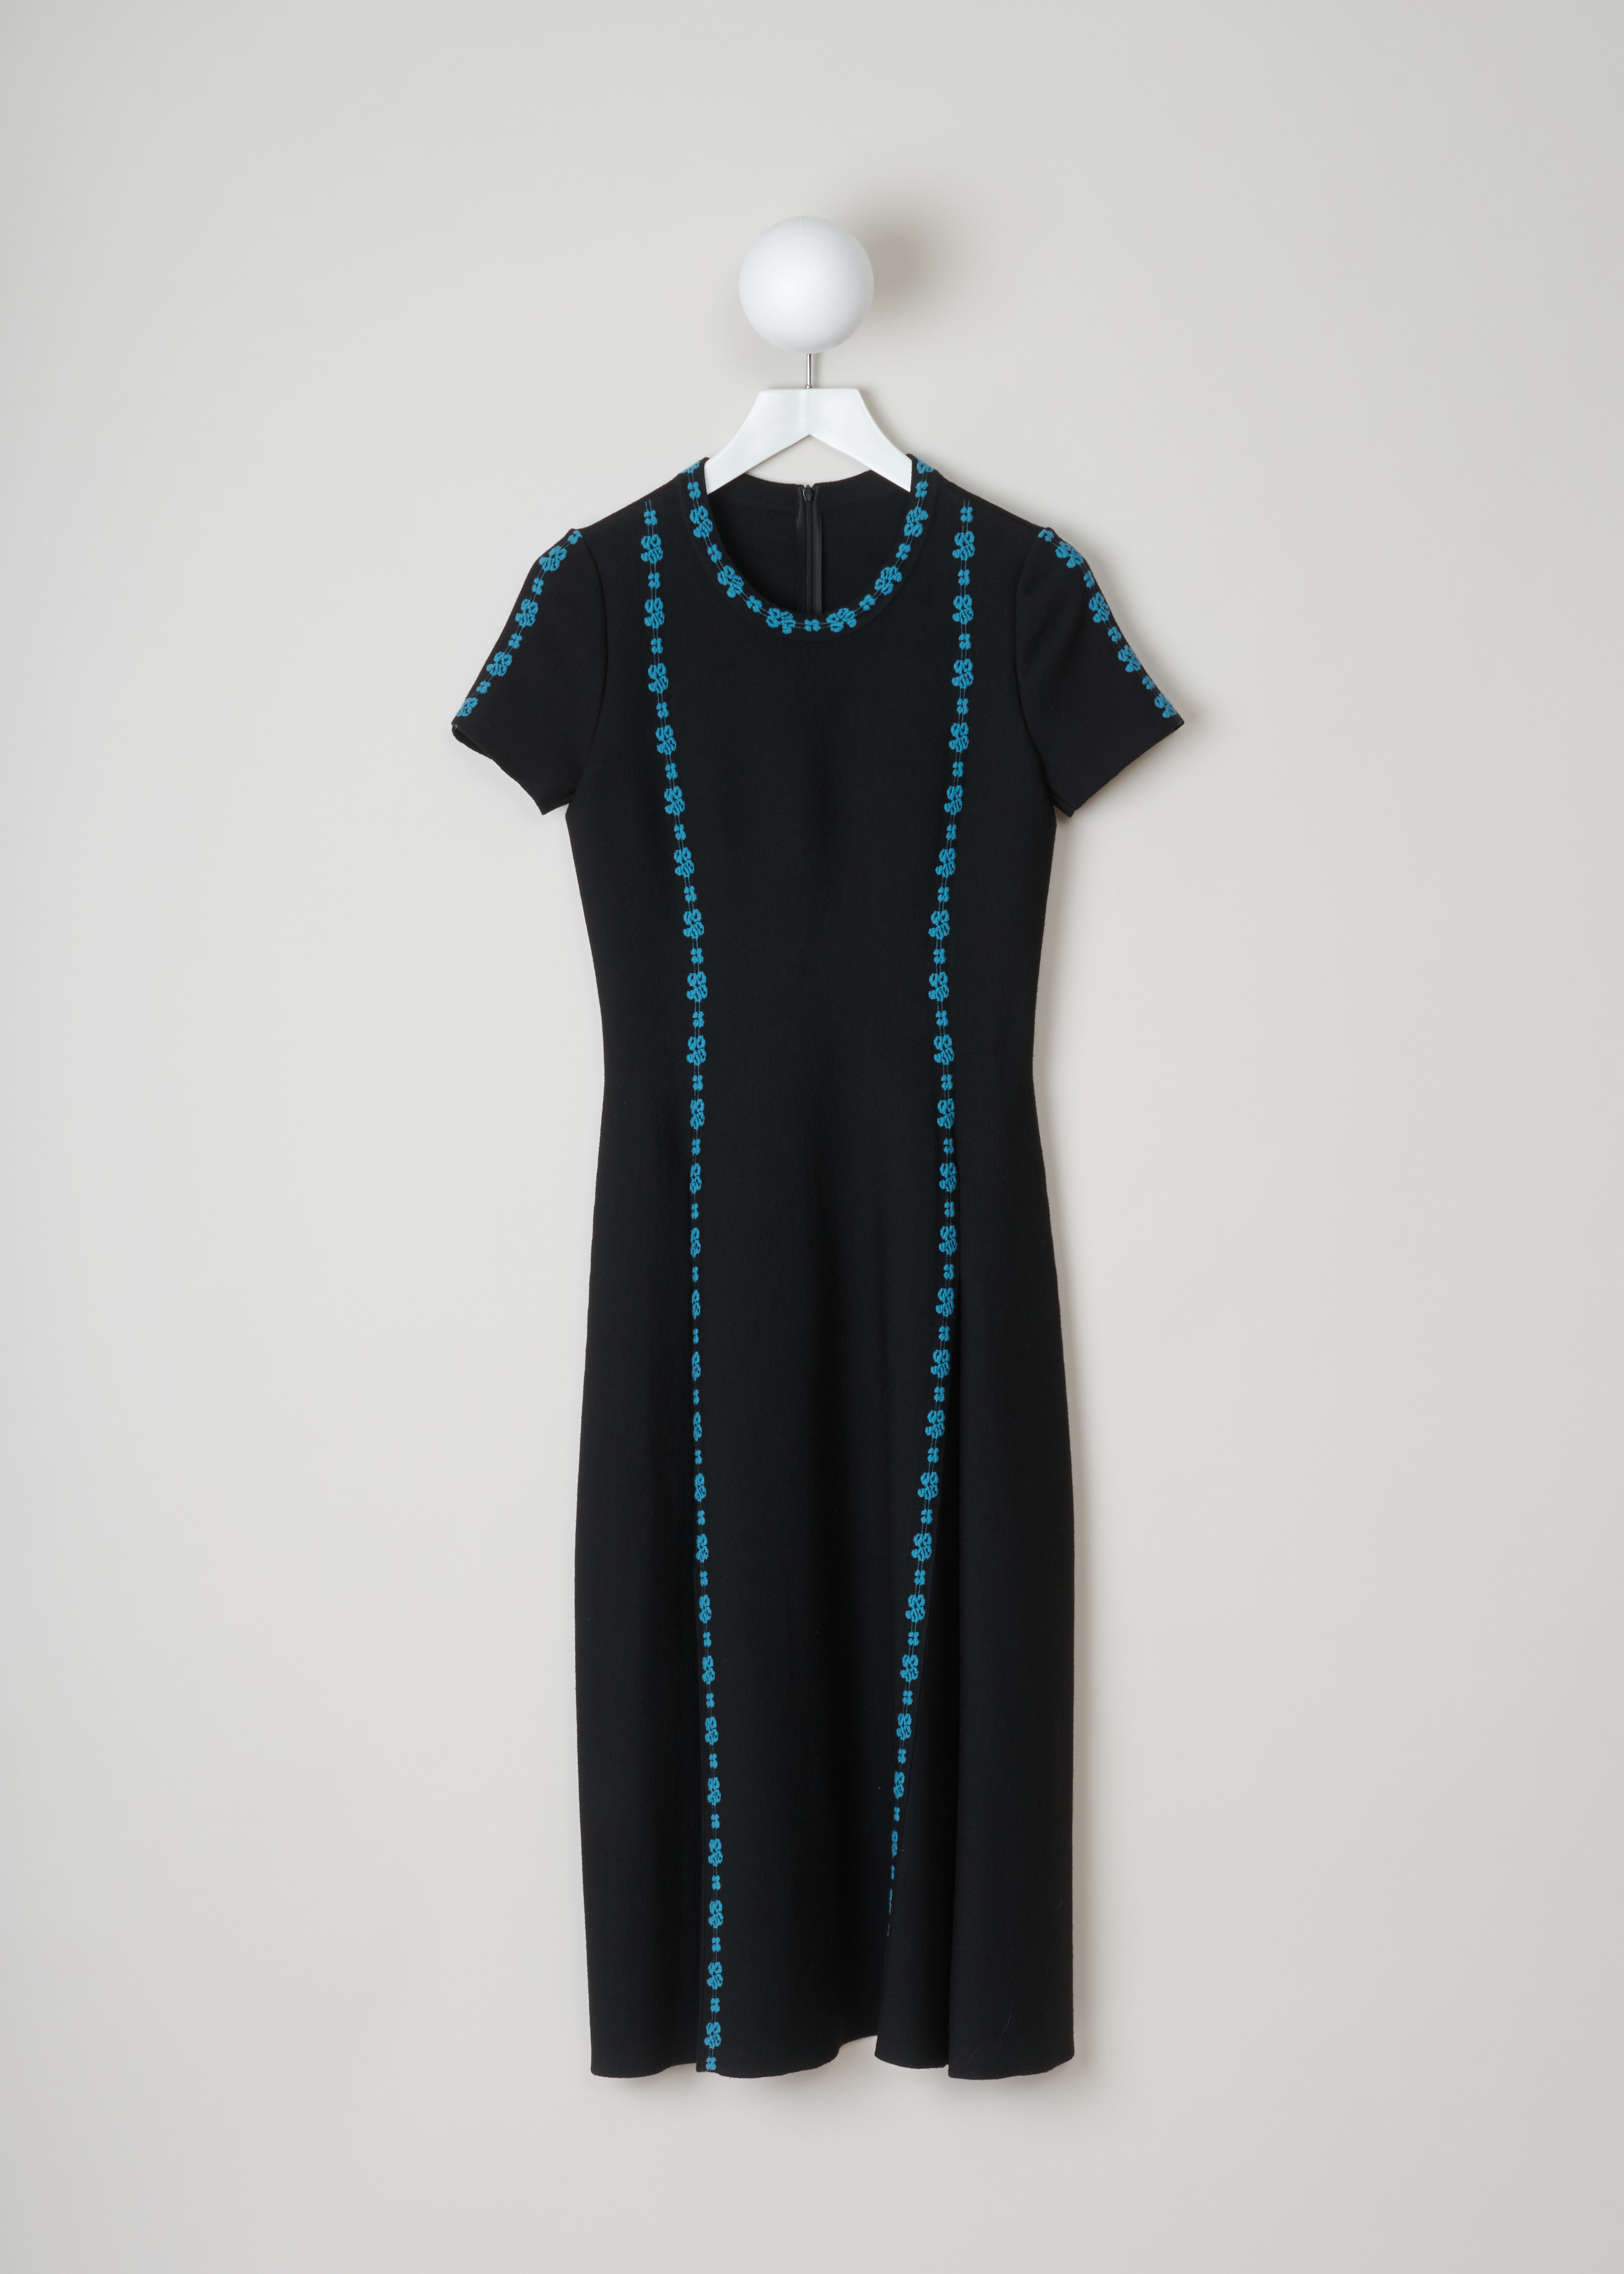 Alaïa Structure knitted dress 7H9RJ63LM364_C928 noir bleu front. Knitted midi dress with a flared skirt, structure knitted blue flower details, a round neckline, short sleeves and an invisible zipper fastening on the back.The dress is with a densely knitted wool-blend fabric which makes the garment heavy.